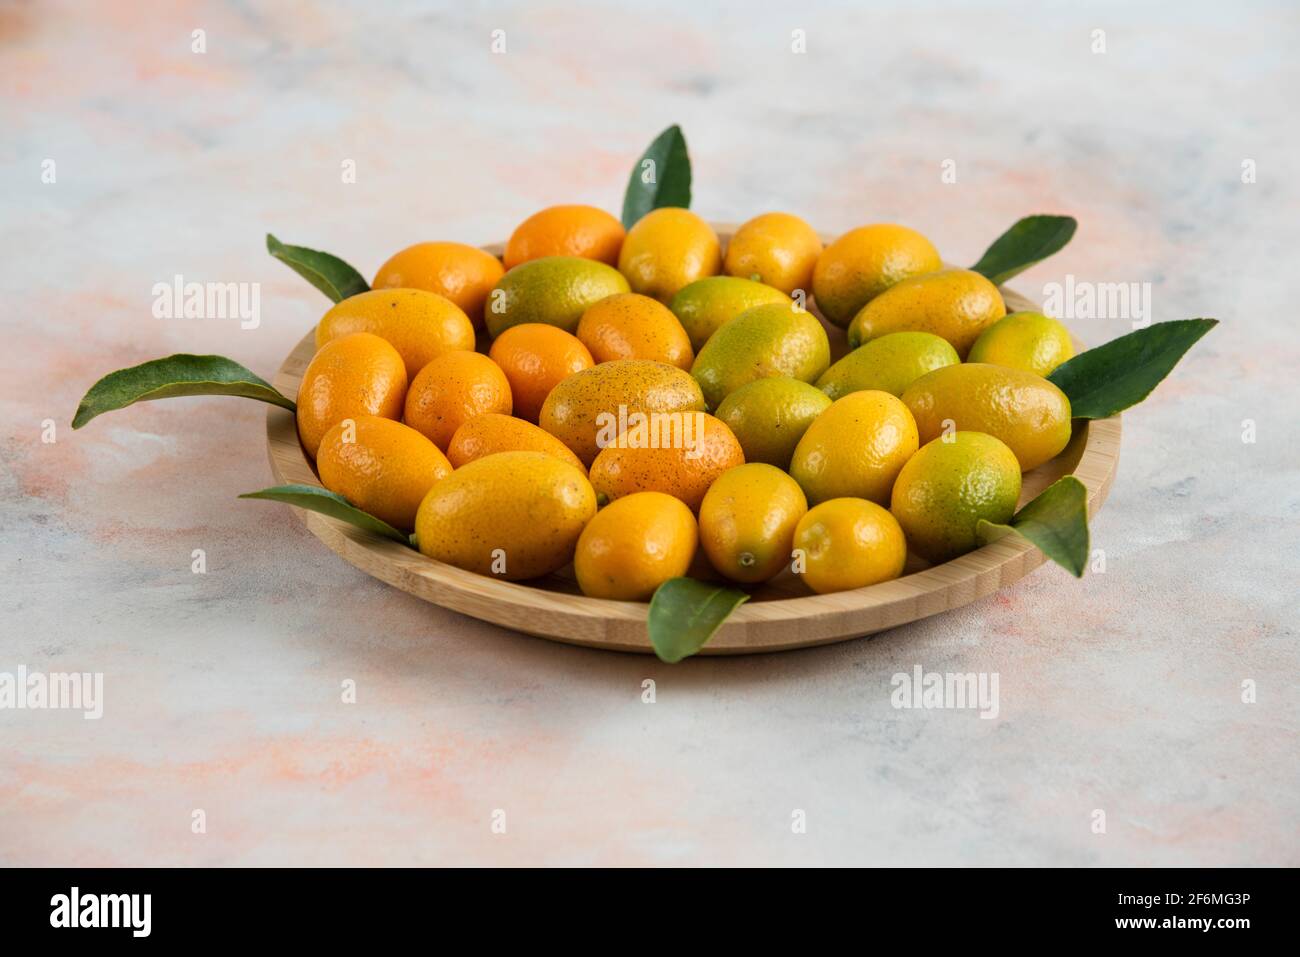 Close up photo, Pile of kumquats on wooden plate over colorful background Stock Photo